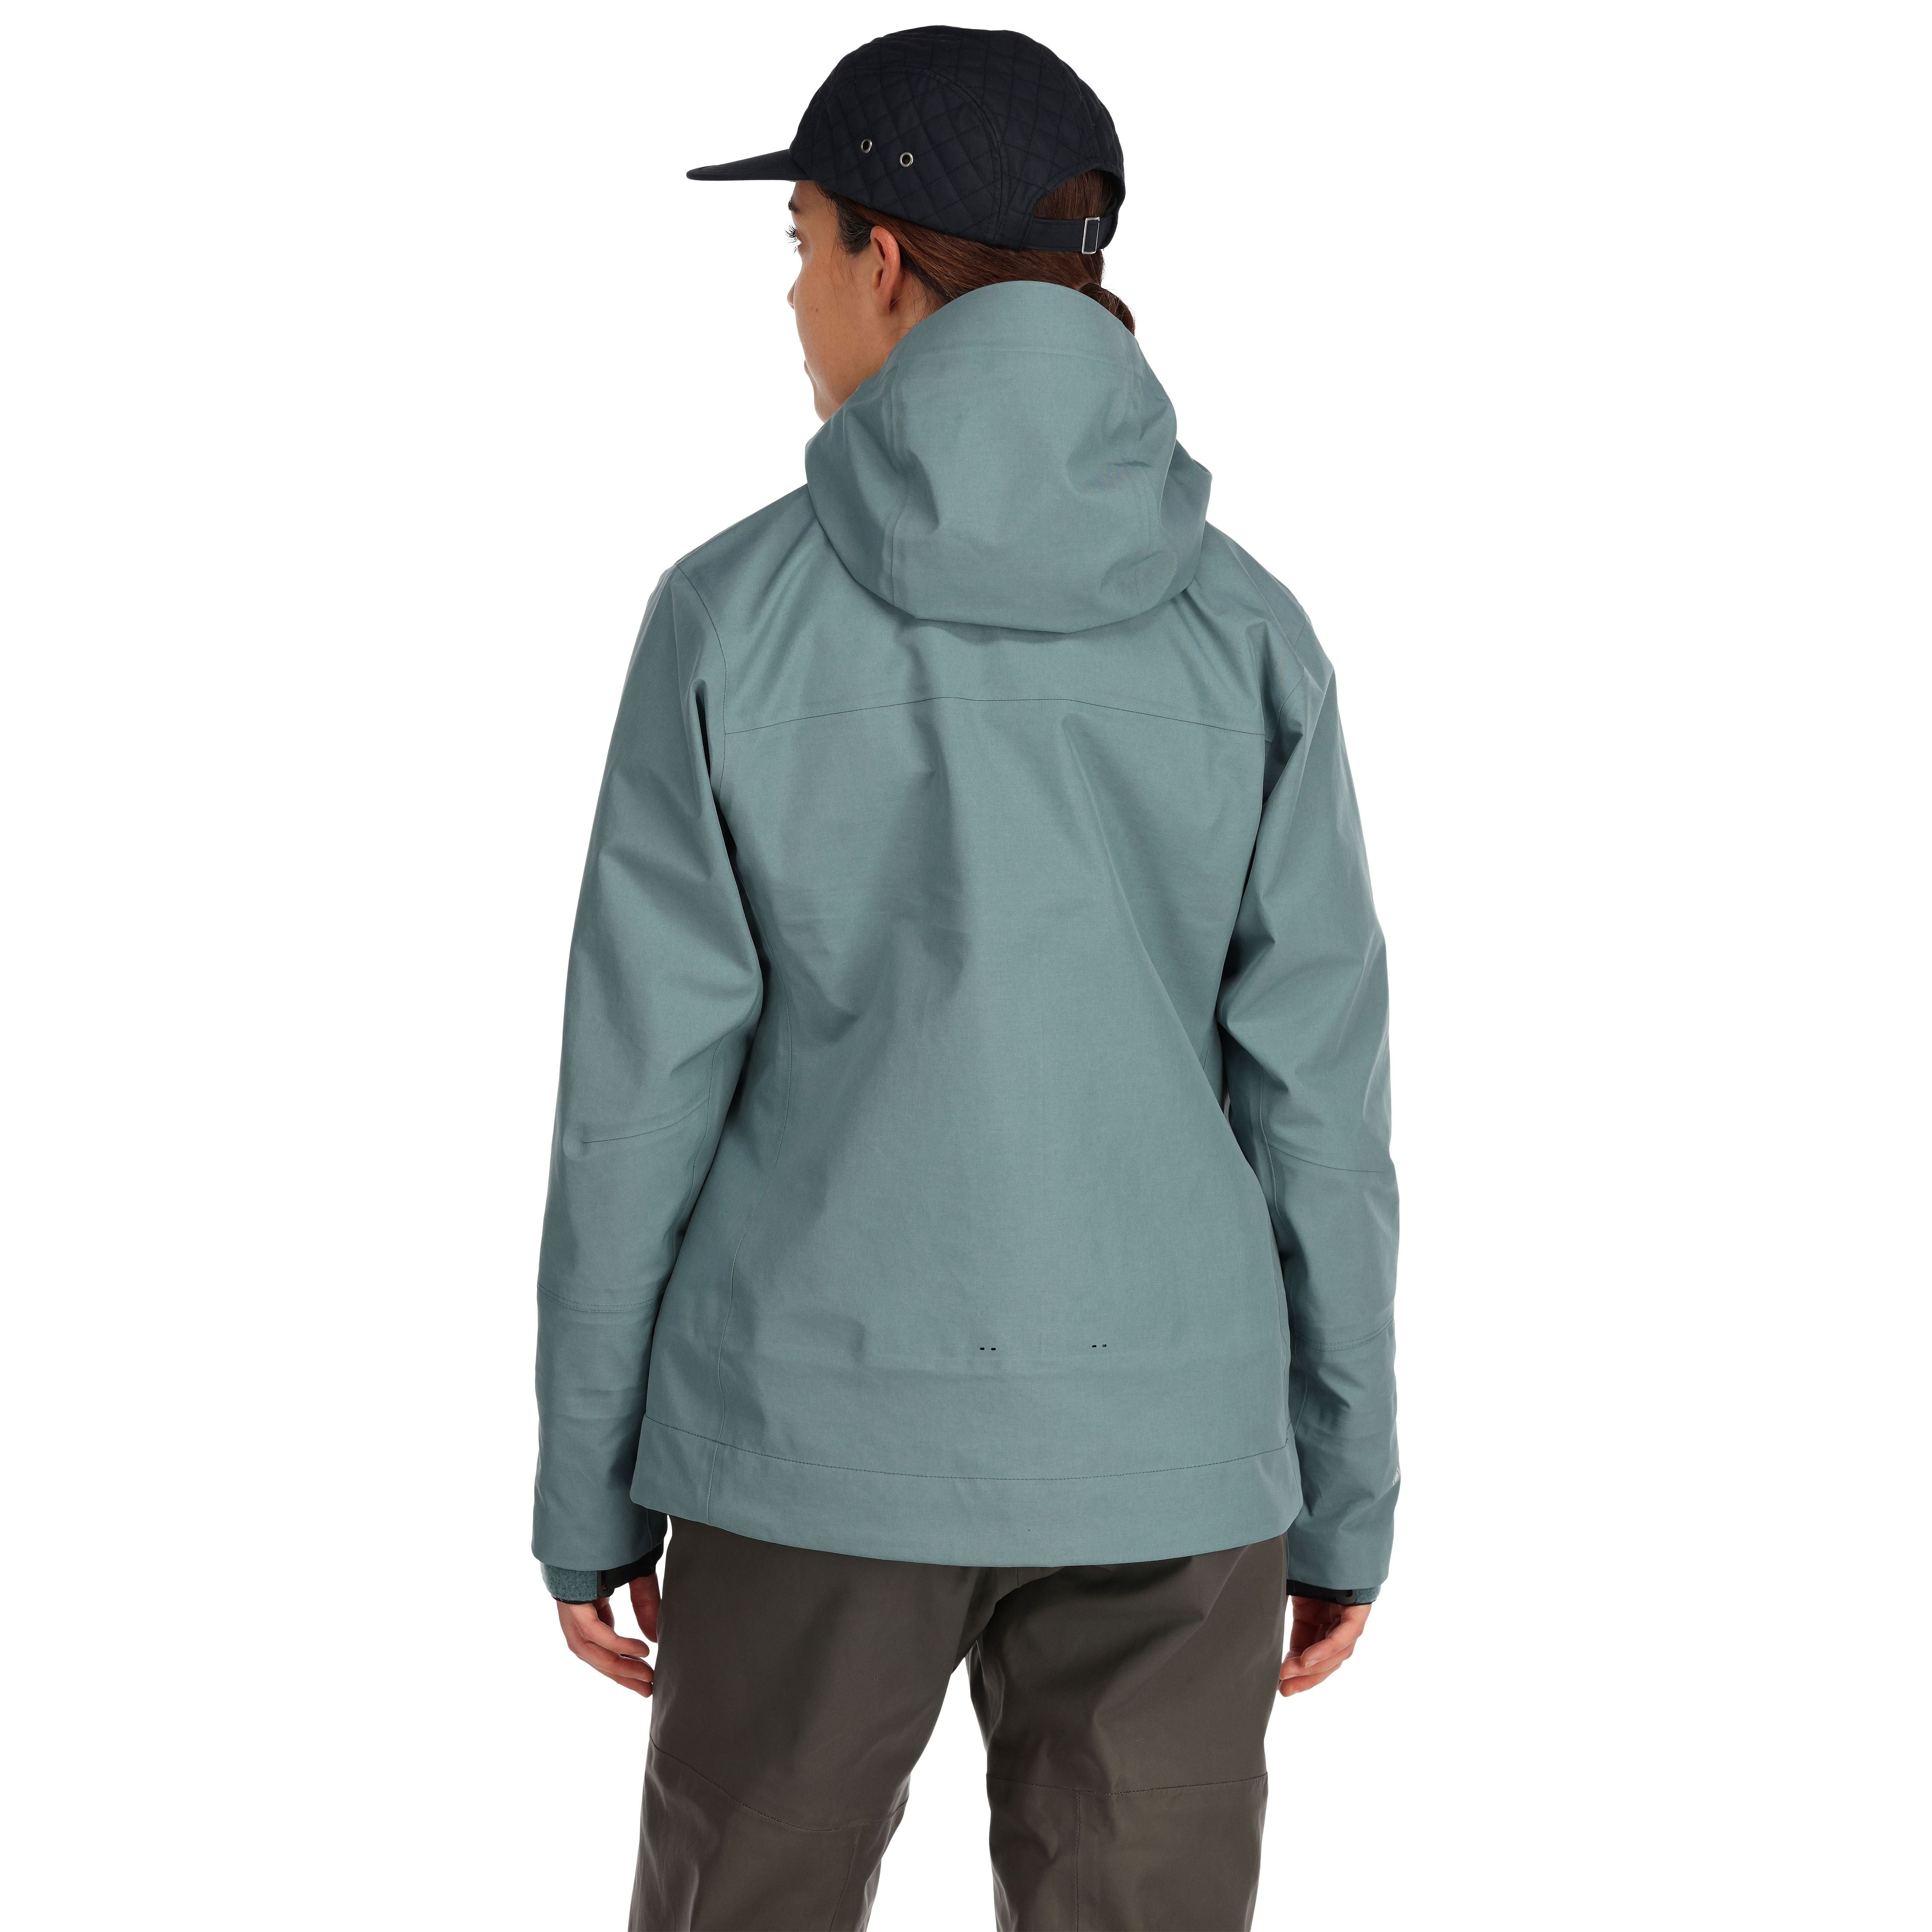 Simms Women's G3 Guide Jacket Avalon Teal Image 04